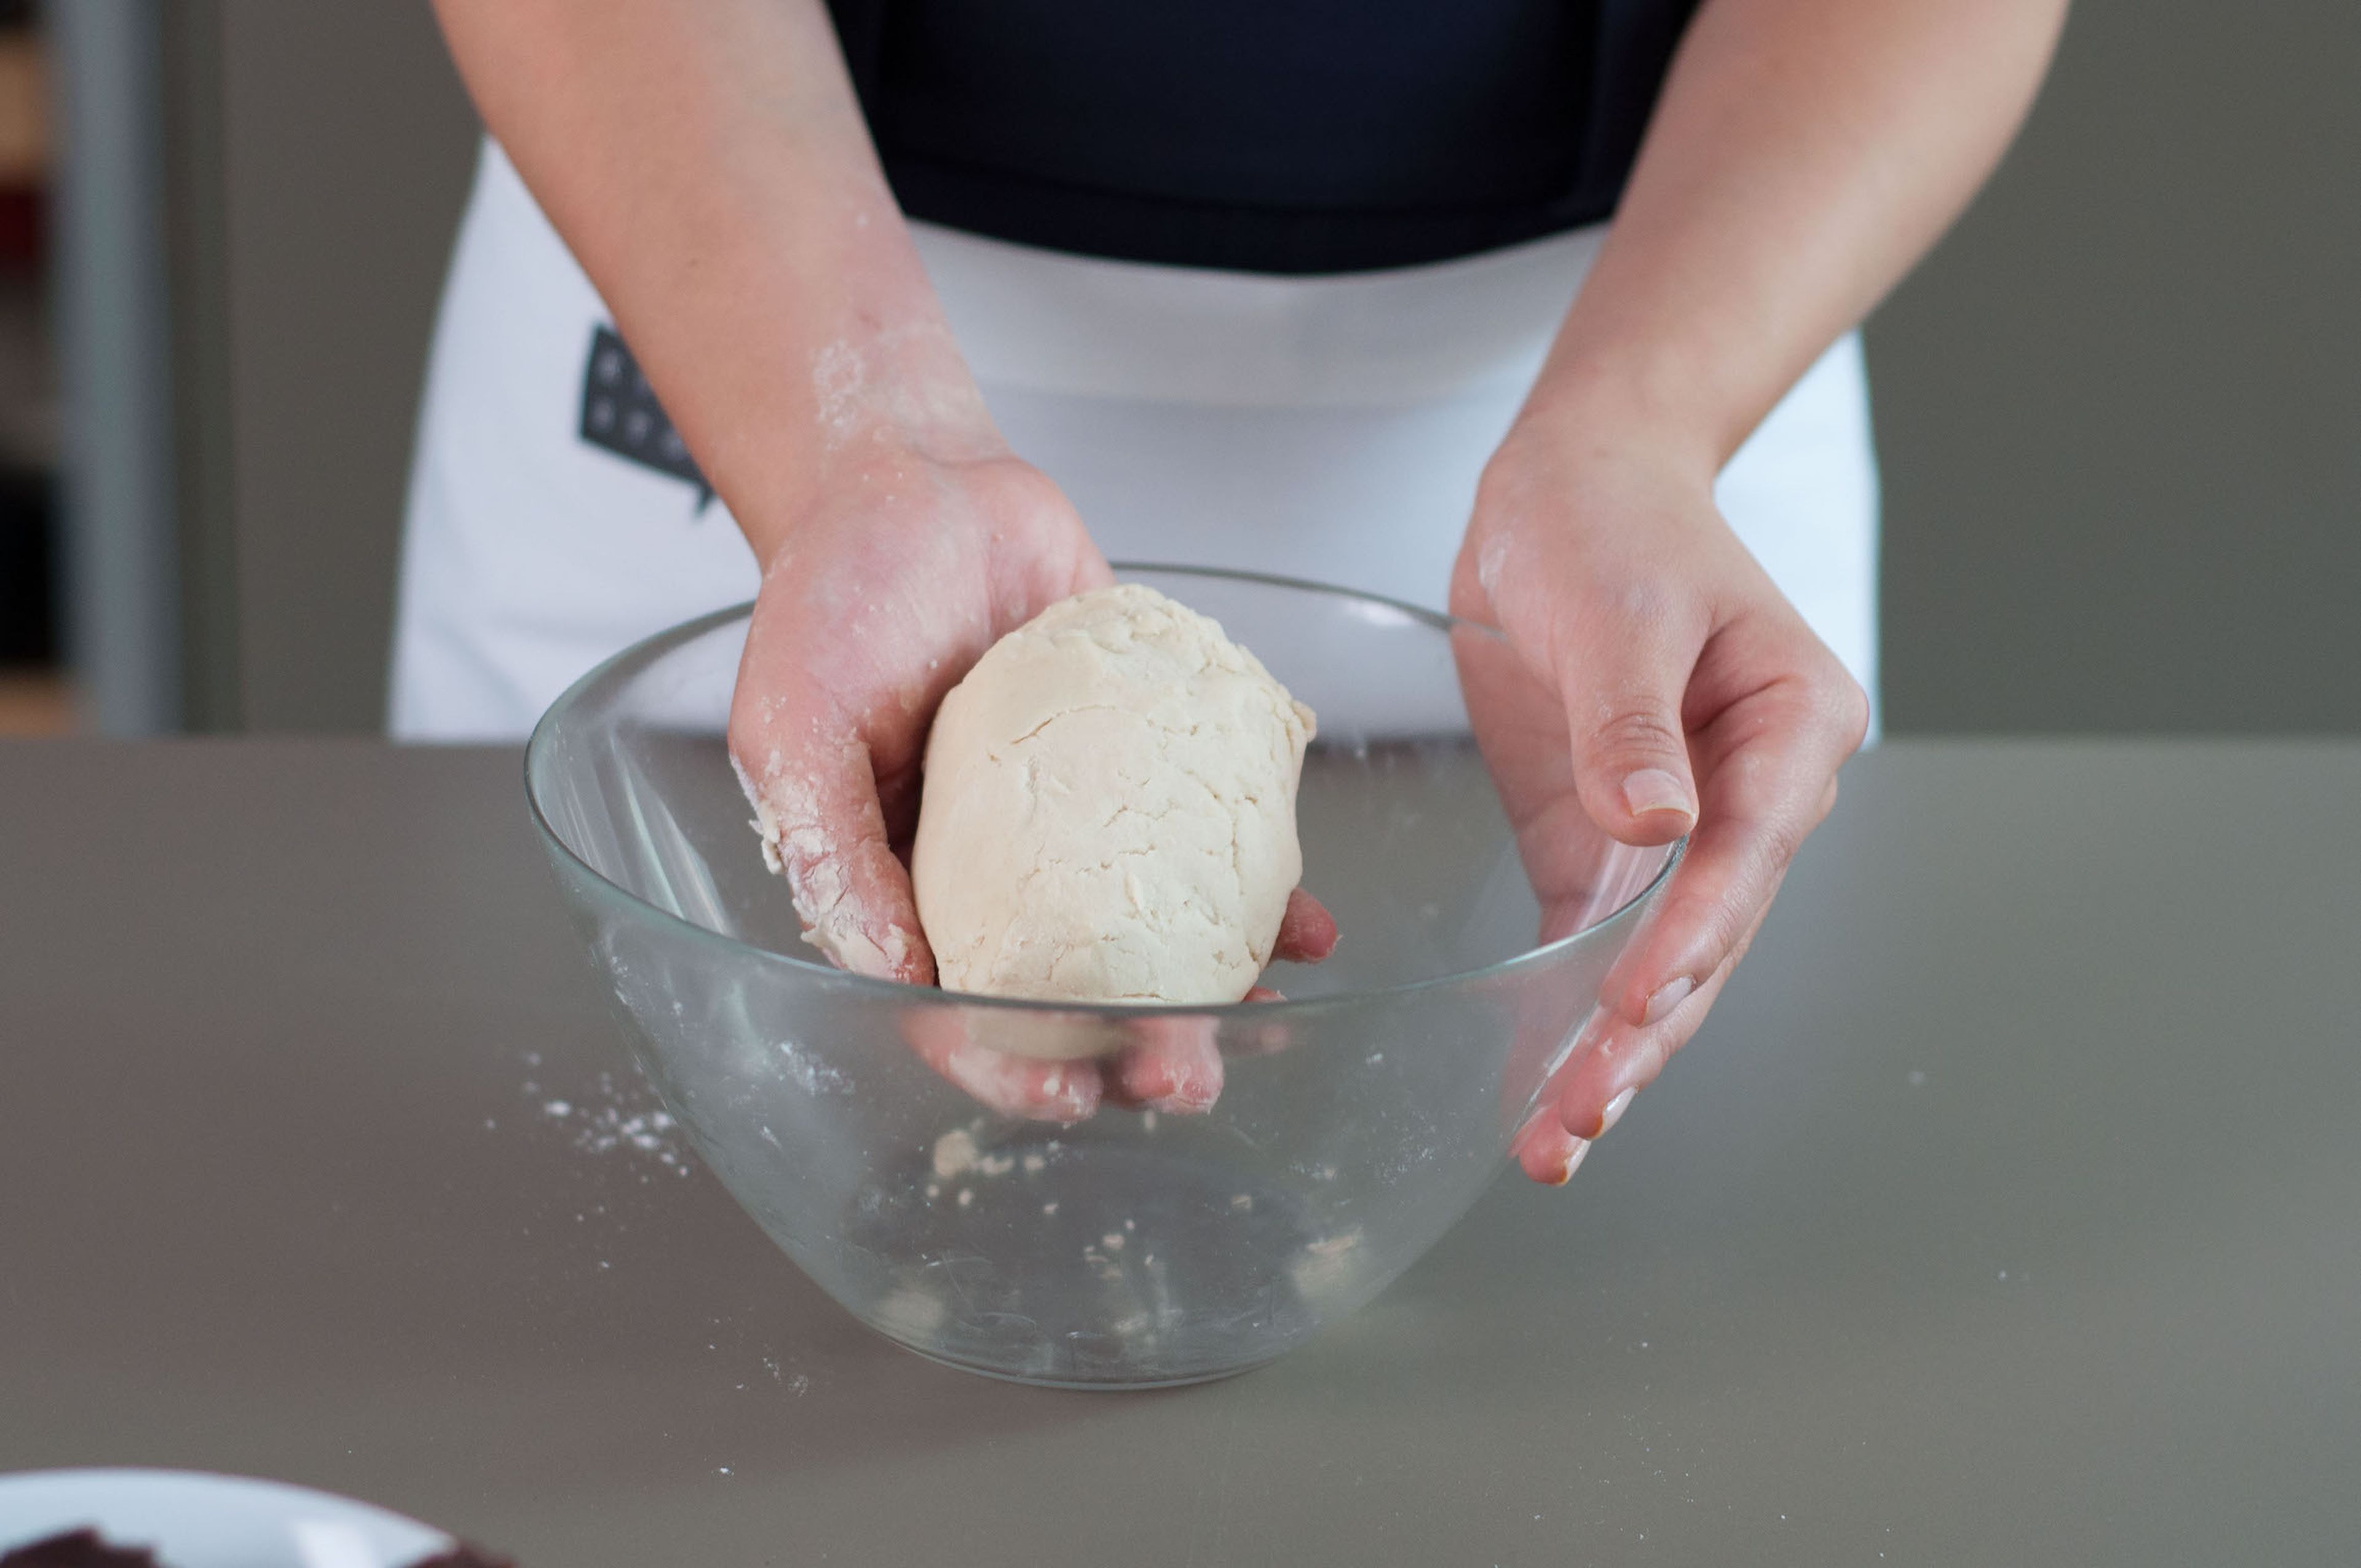 Meanwhile, mix the remaining flour and lard in a separate bowl. Knead into a smooth dough, set aside and also let rest for approx. 30 min.